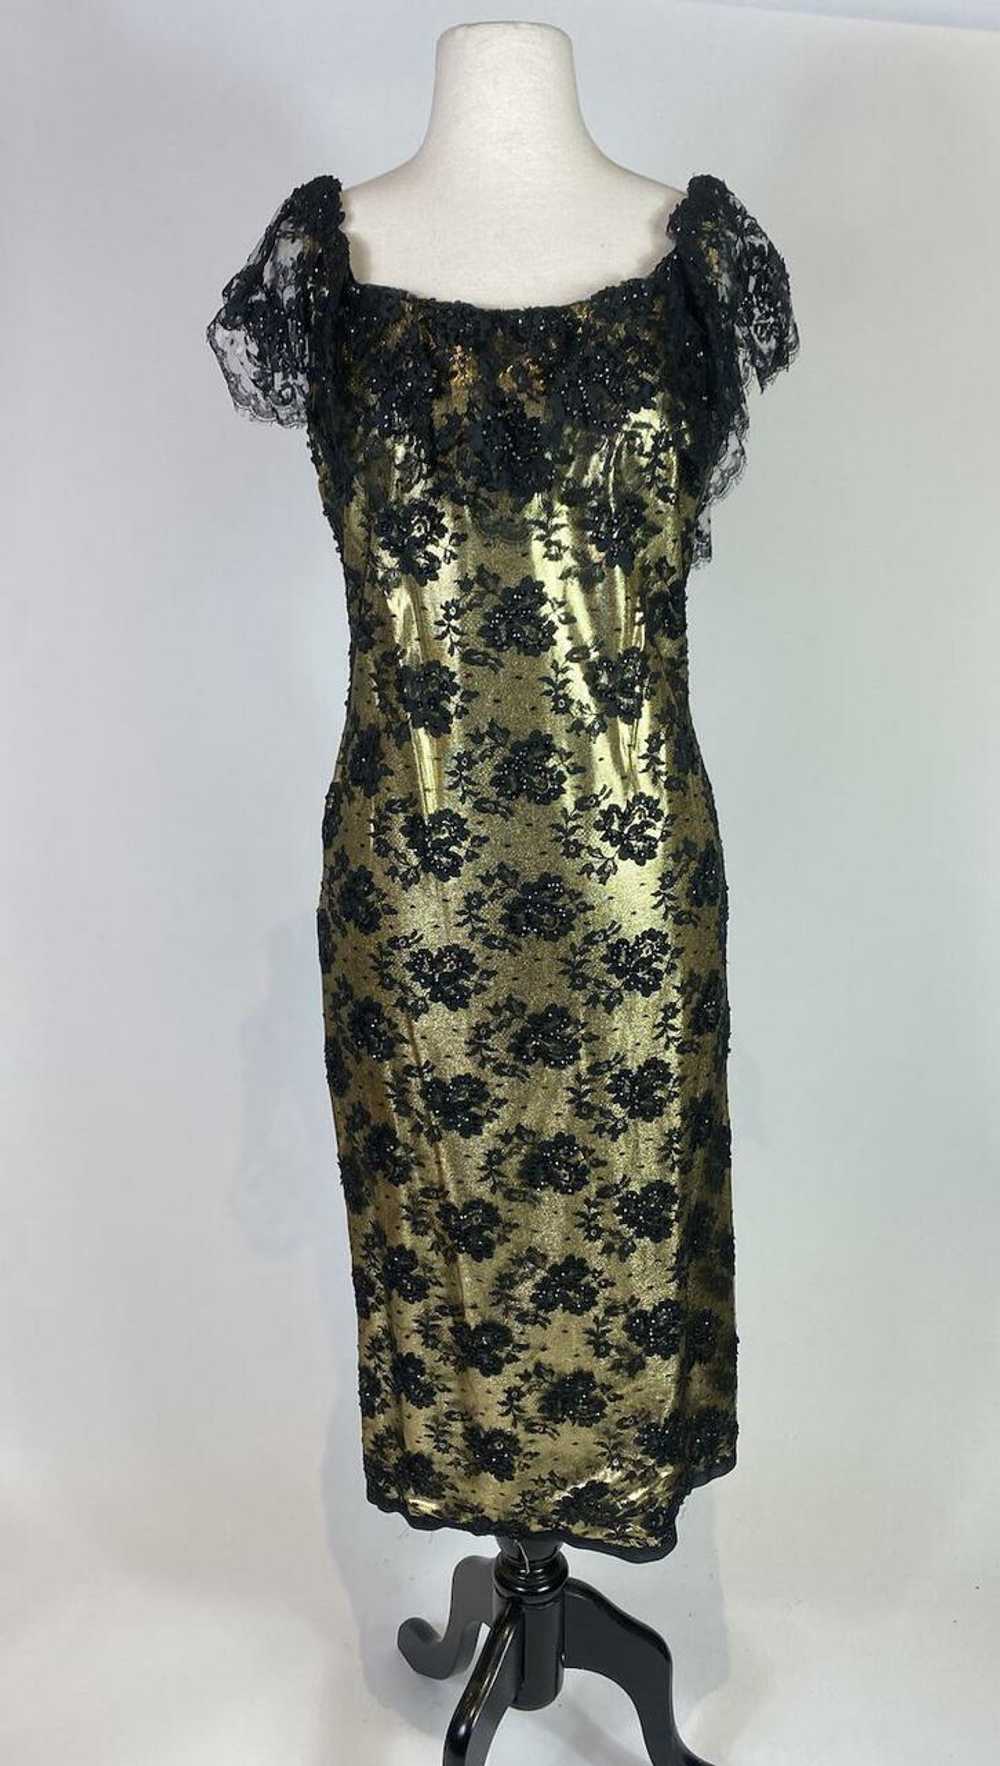 1950s - 1960s Gold Lace Overlay Sequin Dress - image 2